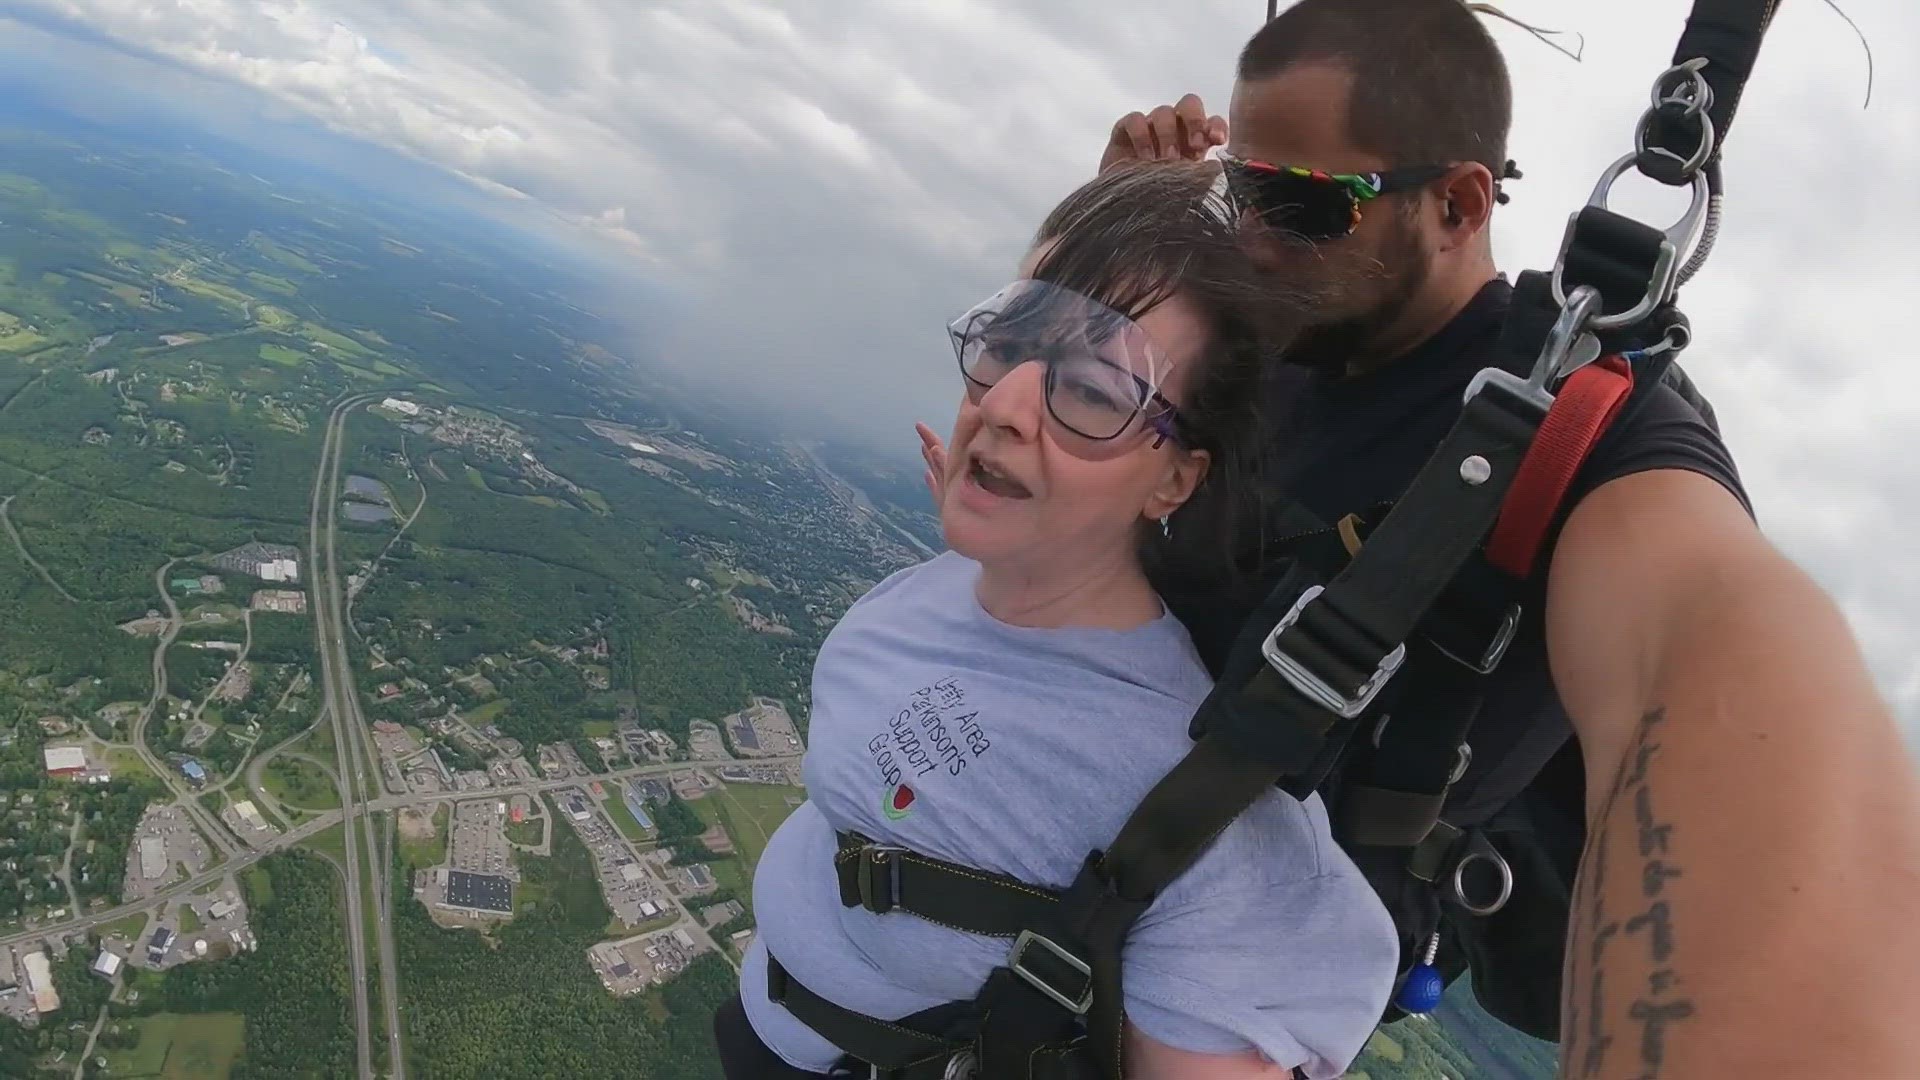 Eleanor Bilodeau said her husband, Gerard, always wanted to jump one last time before his death.